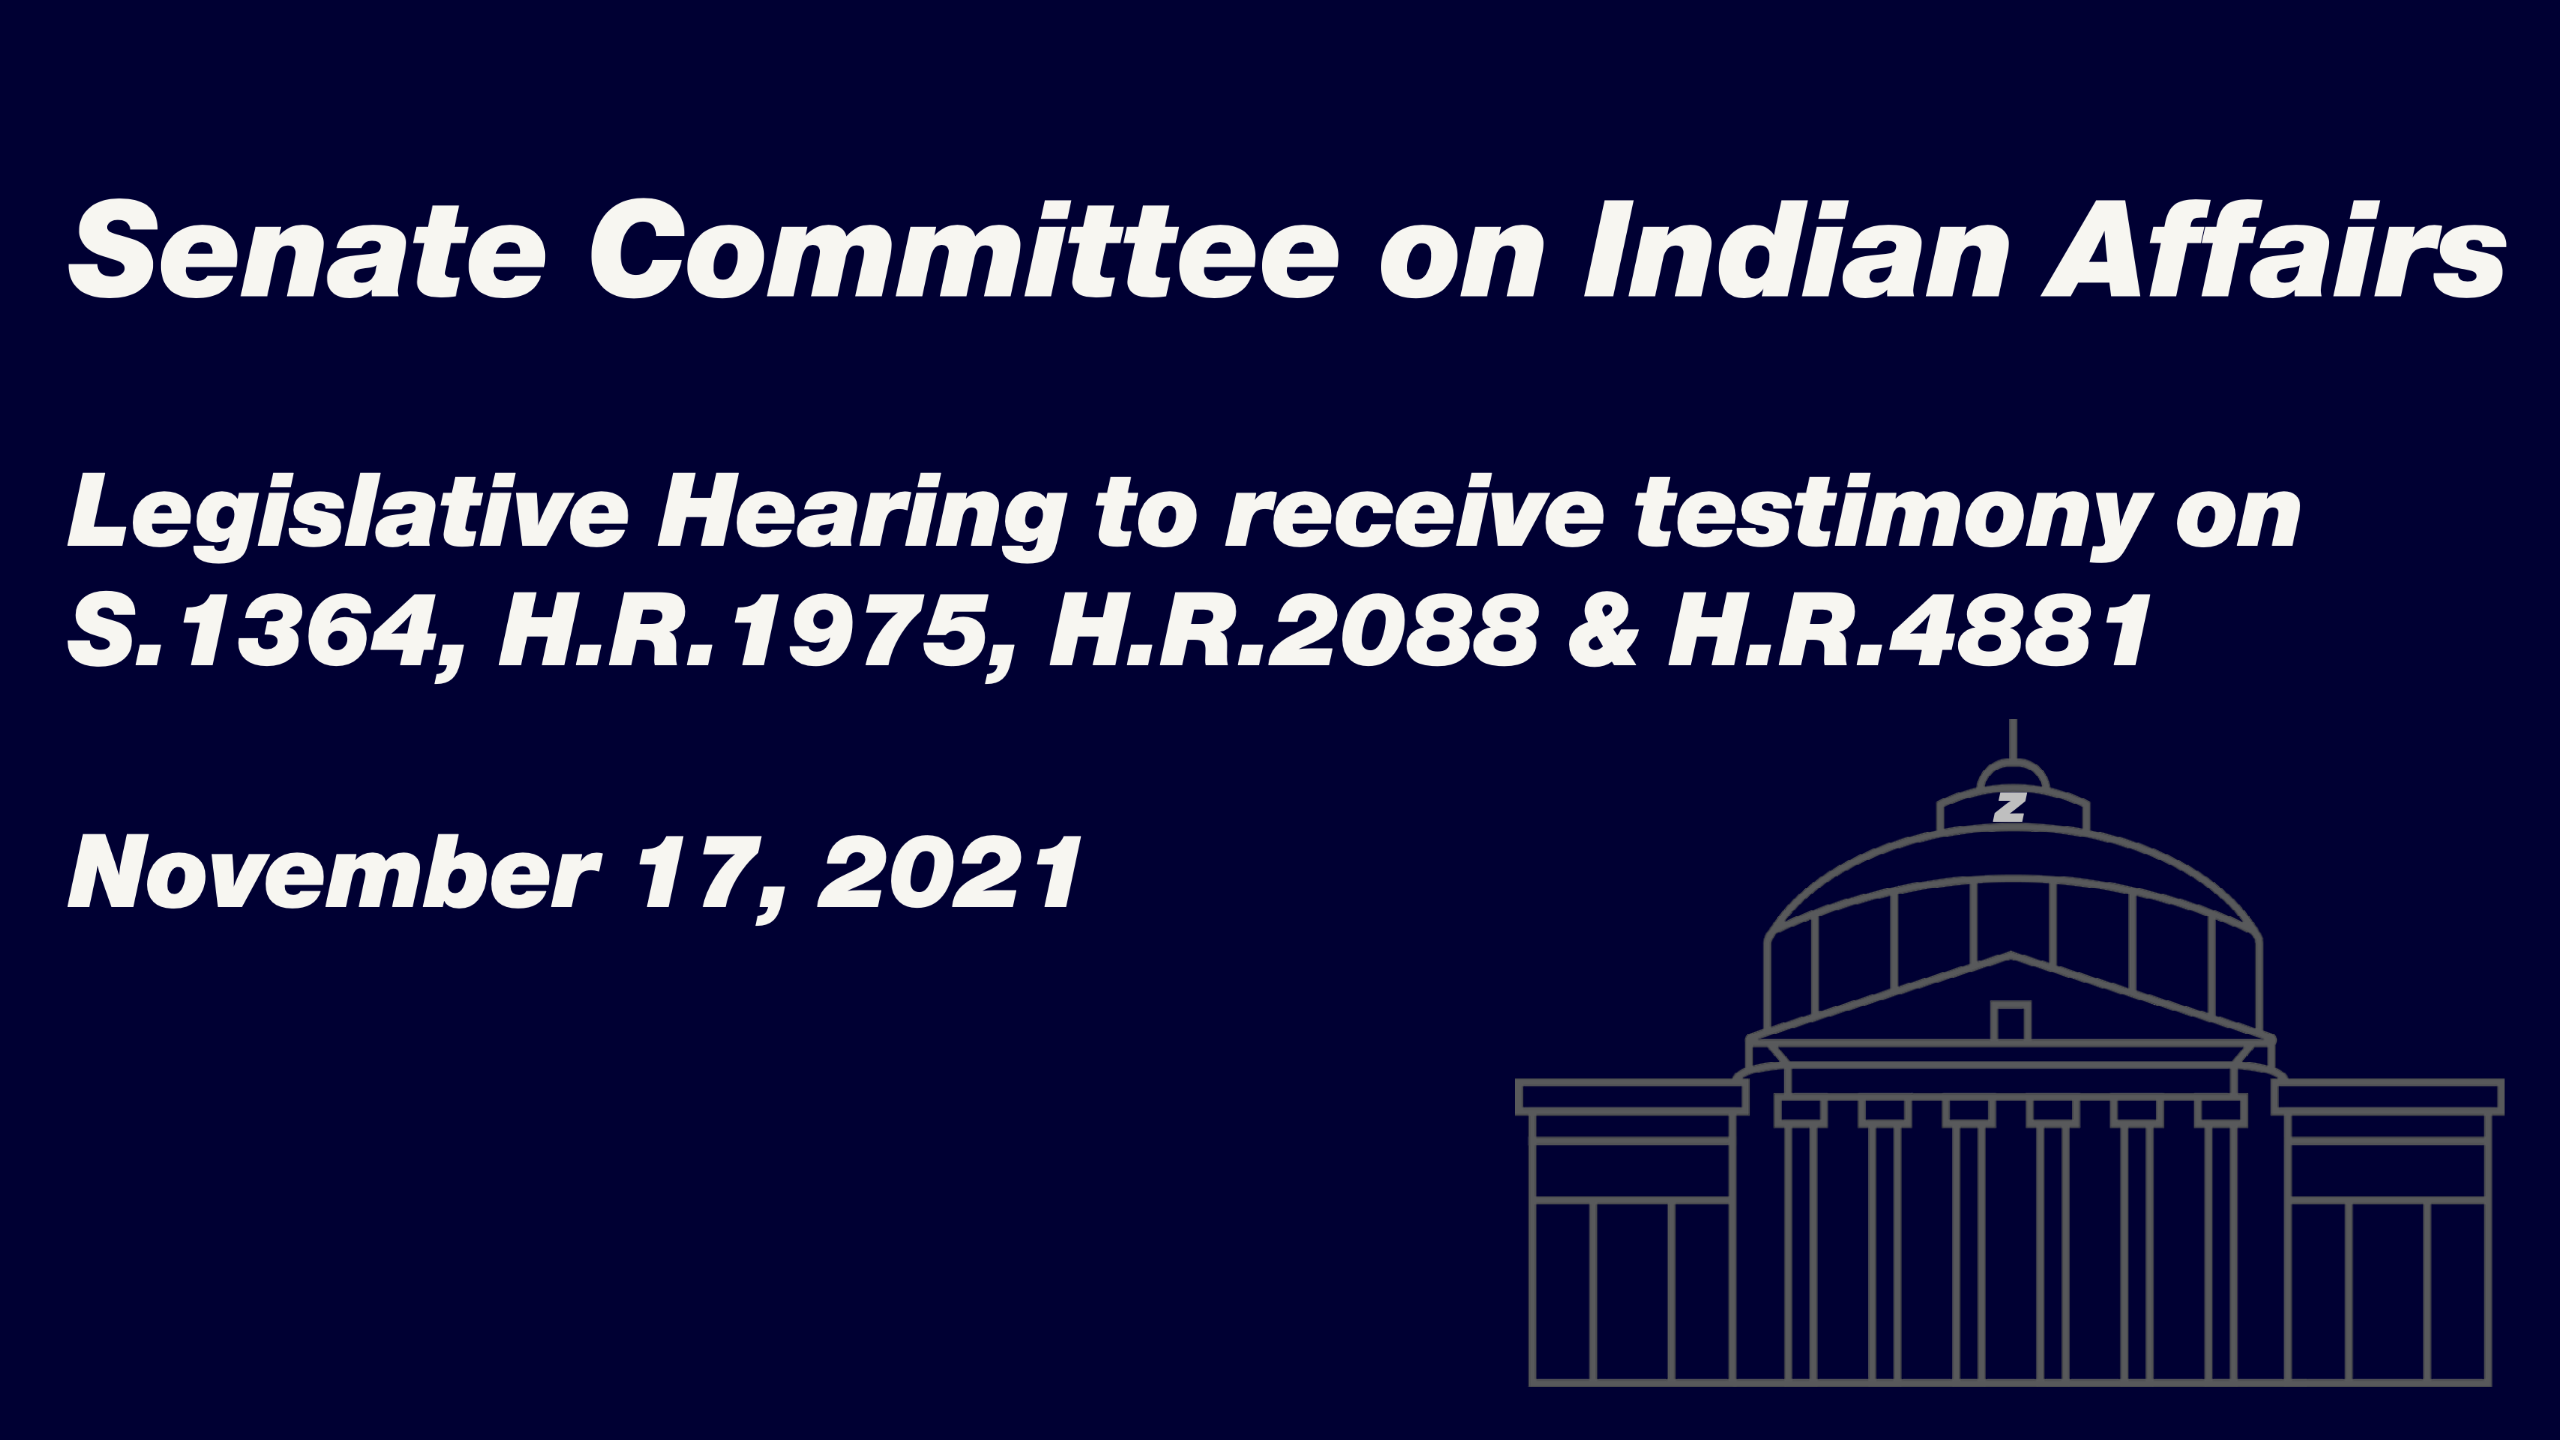 Senate Committee on Indian Affairs Legislative Hearing to receive testimony on S. 1364, H.R. 1975, H.R. 2088 & H.R. 4881